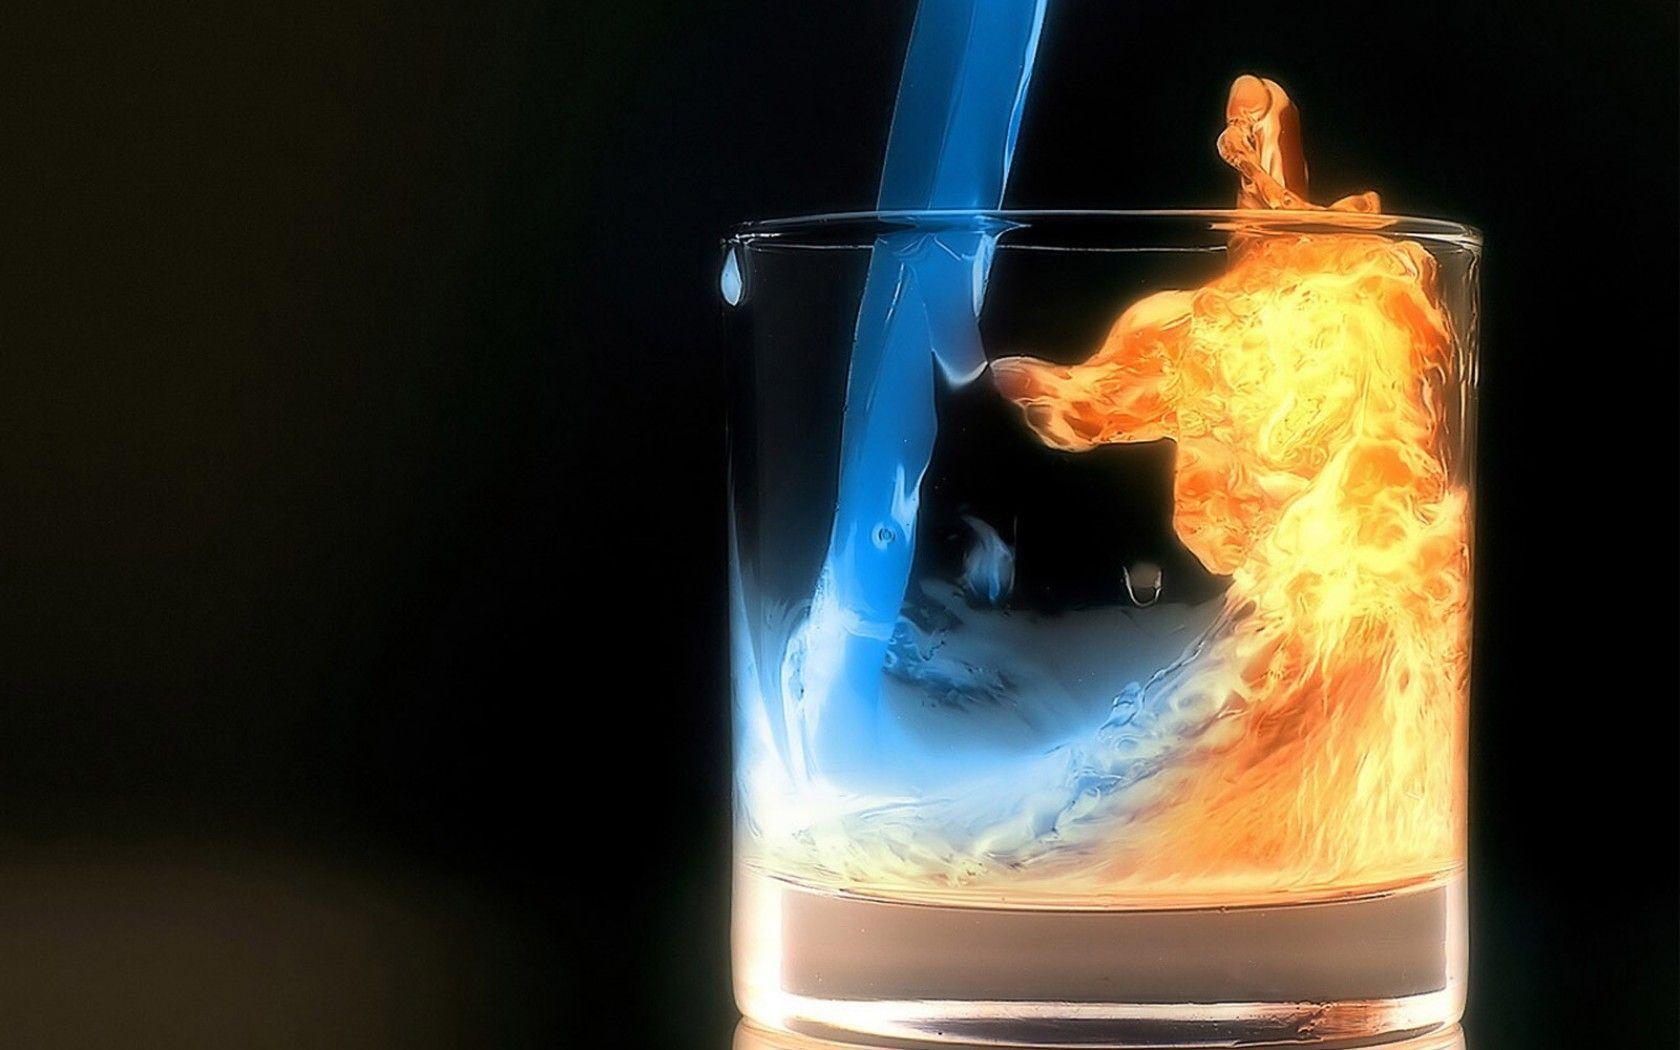 Wallpaper For > Cool Fire And Water Wallpaper